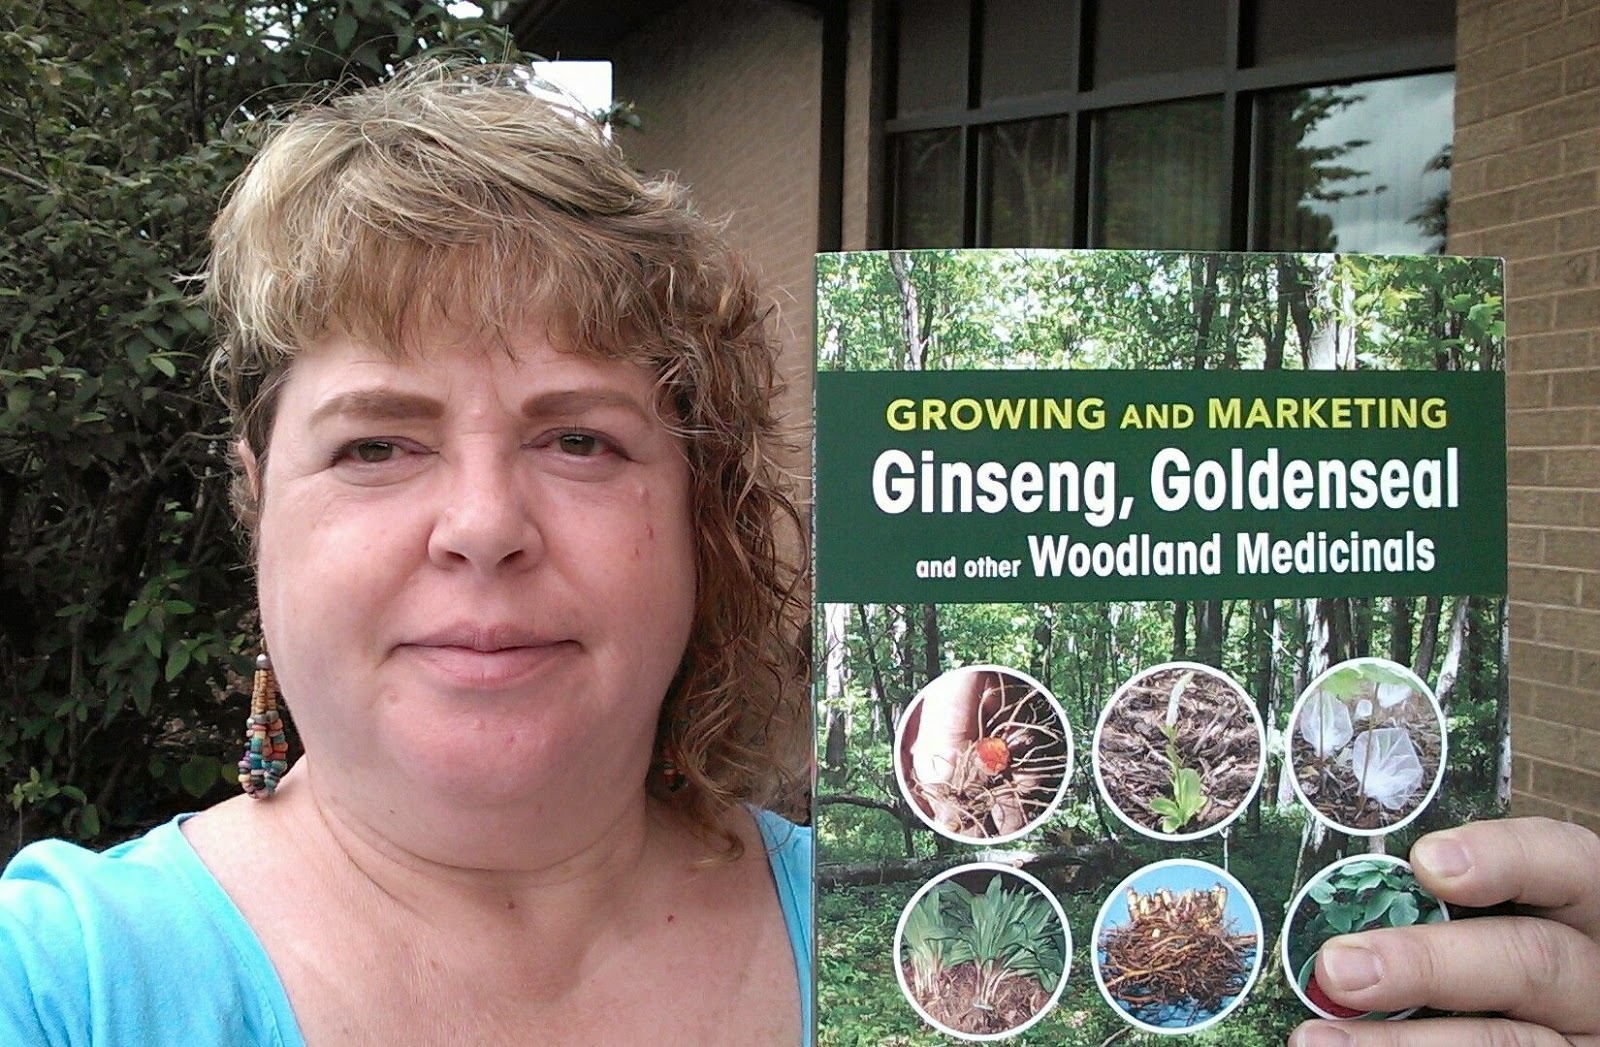 Growing and Marketing Ginseng Goldenseal and other Woodland Medicinals